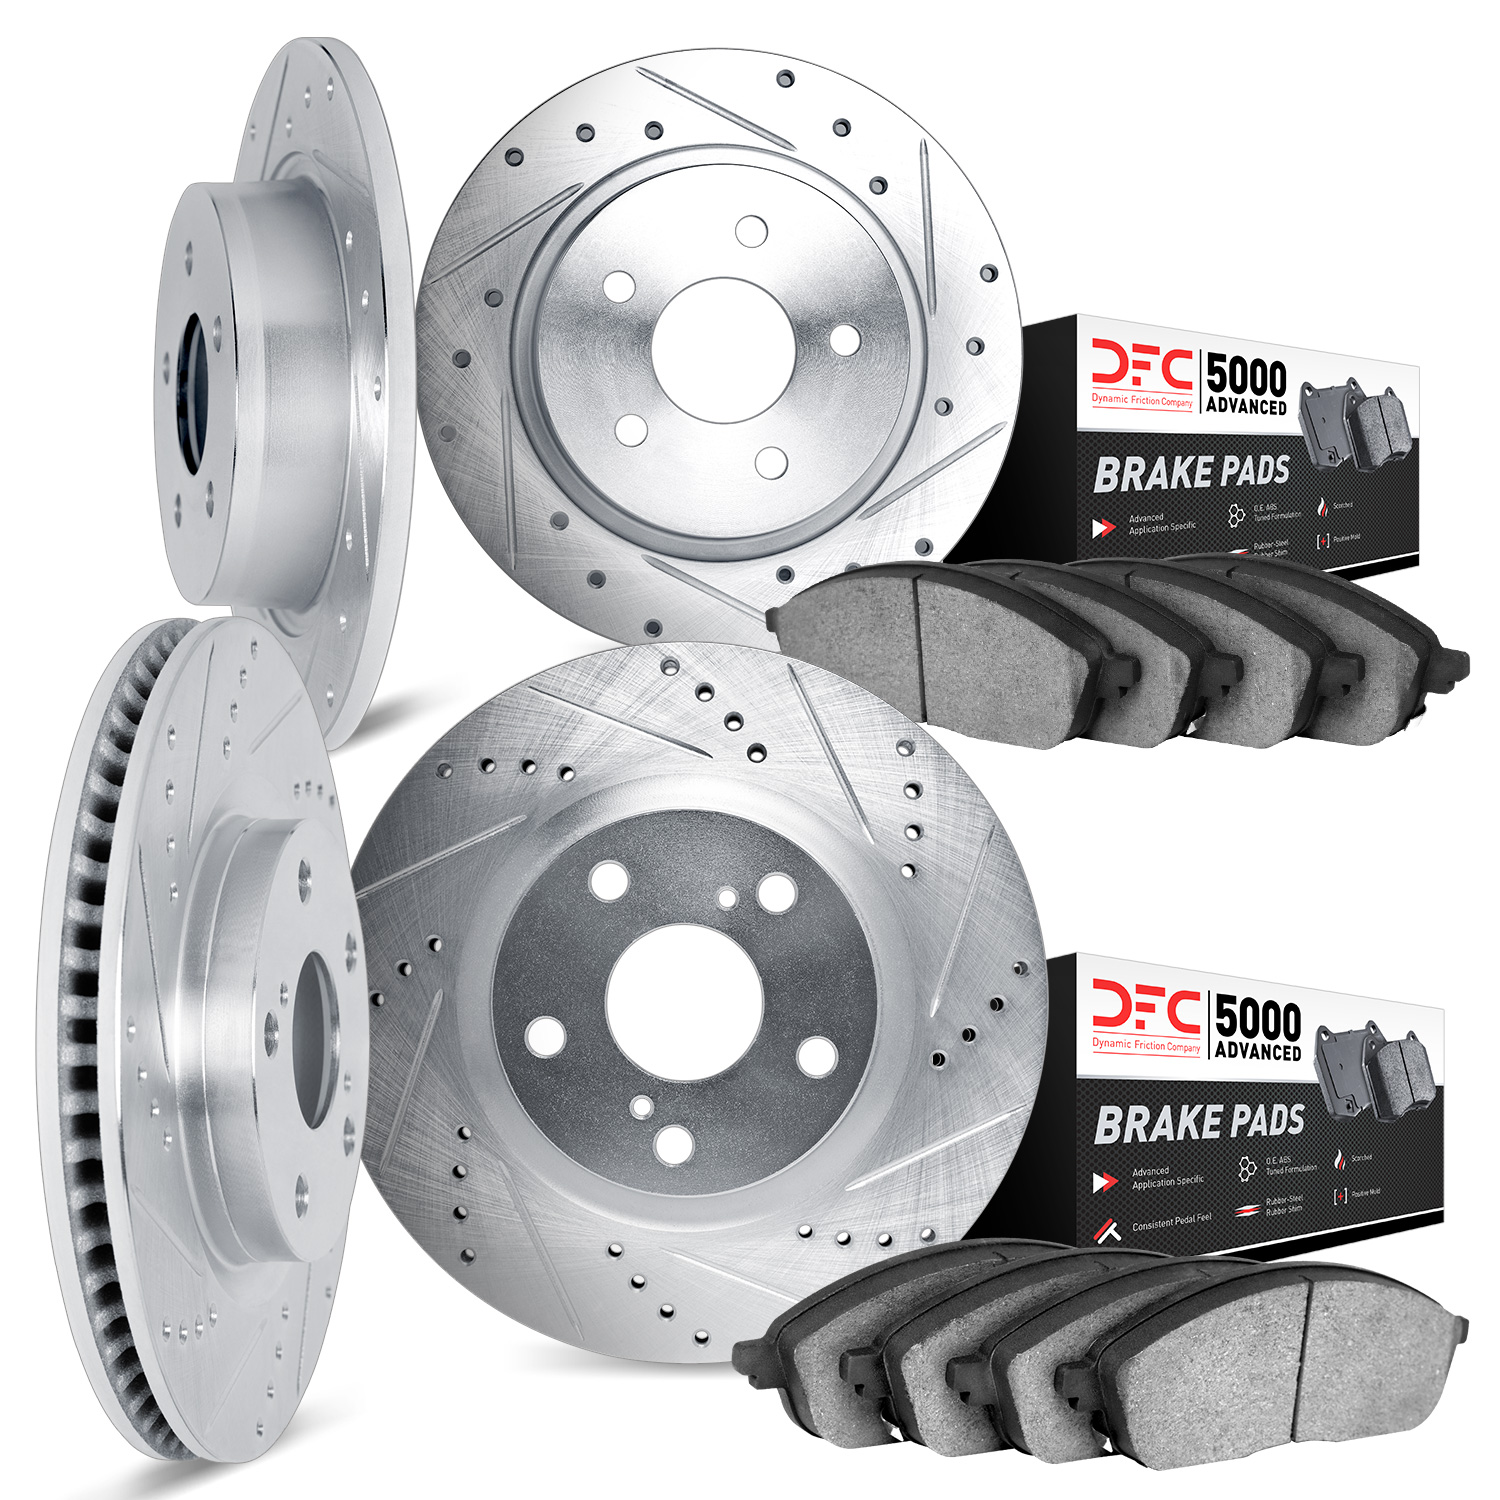 7504-31002 Drilled/Slotted Brake Rotors w/5000 Advanced Brake Pads Kit [Silver], 1995-2001 BMW, Position: Front and Rear